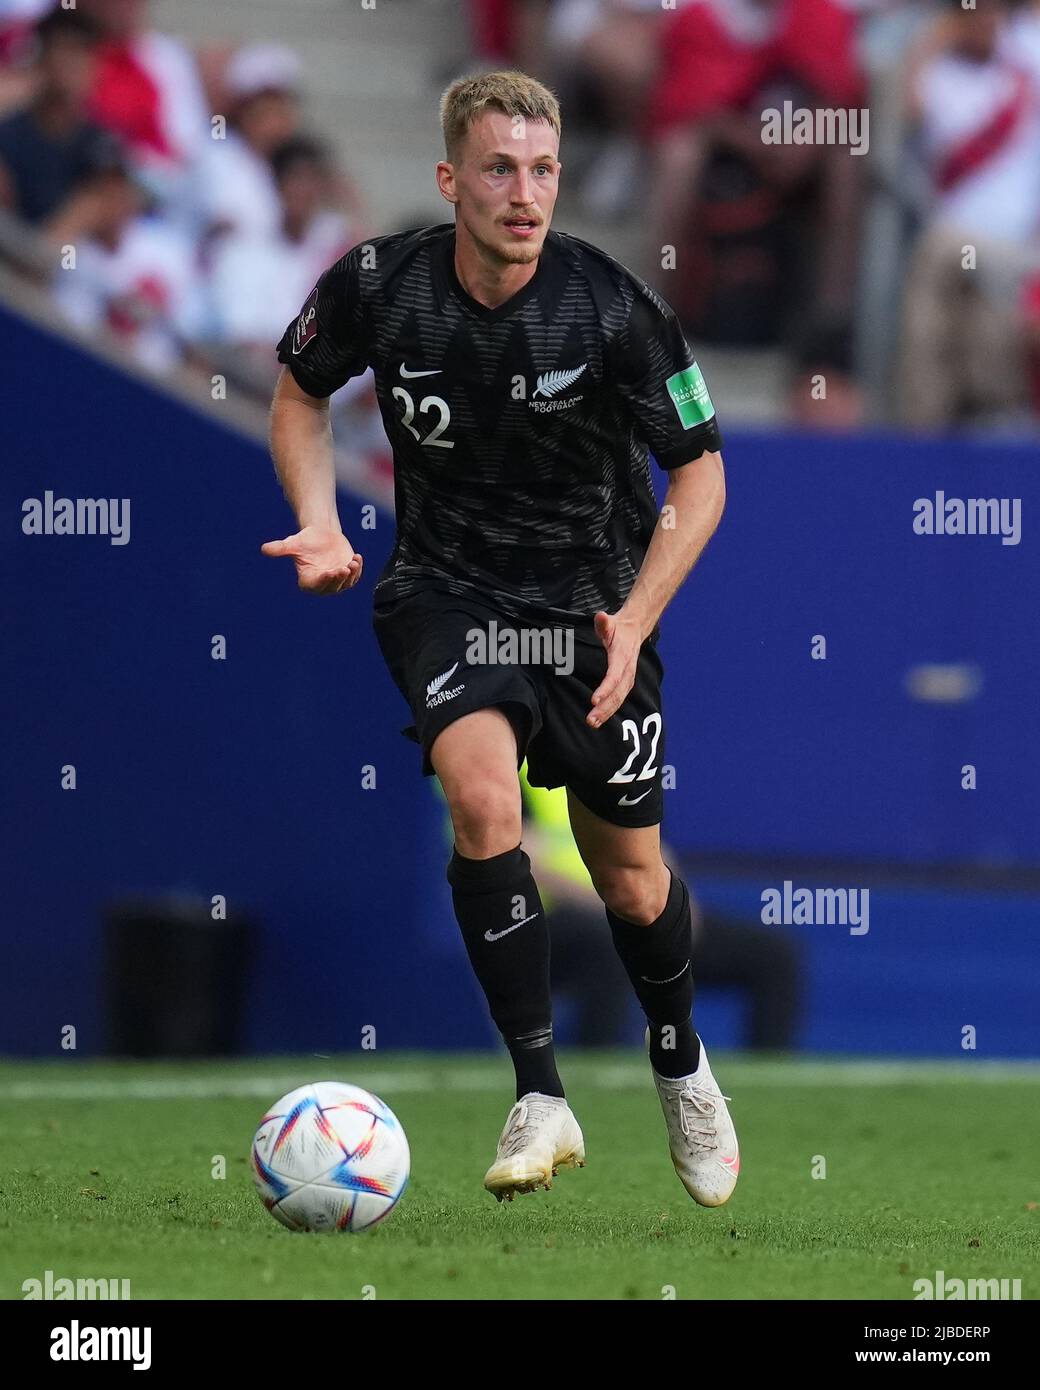 Barcelona, Spain. June 5, 2022, Alexander Callens of New Zealand during the friendly match between Peru and New Zealand played at RCDE Stadium on June 5, 2022 in Barcelona, Spain. (Photo by Bagu Blanco / PRESSINPHOTO) Stock Photo